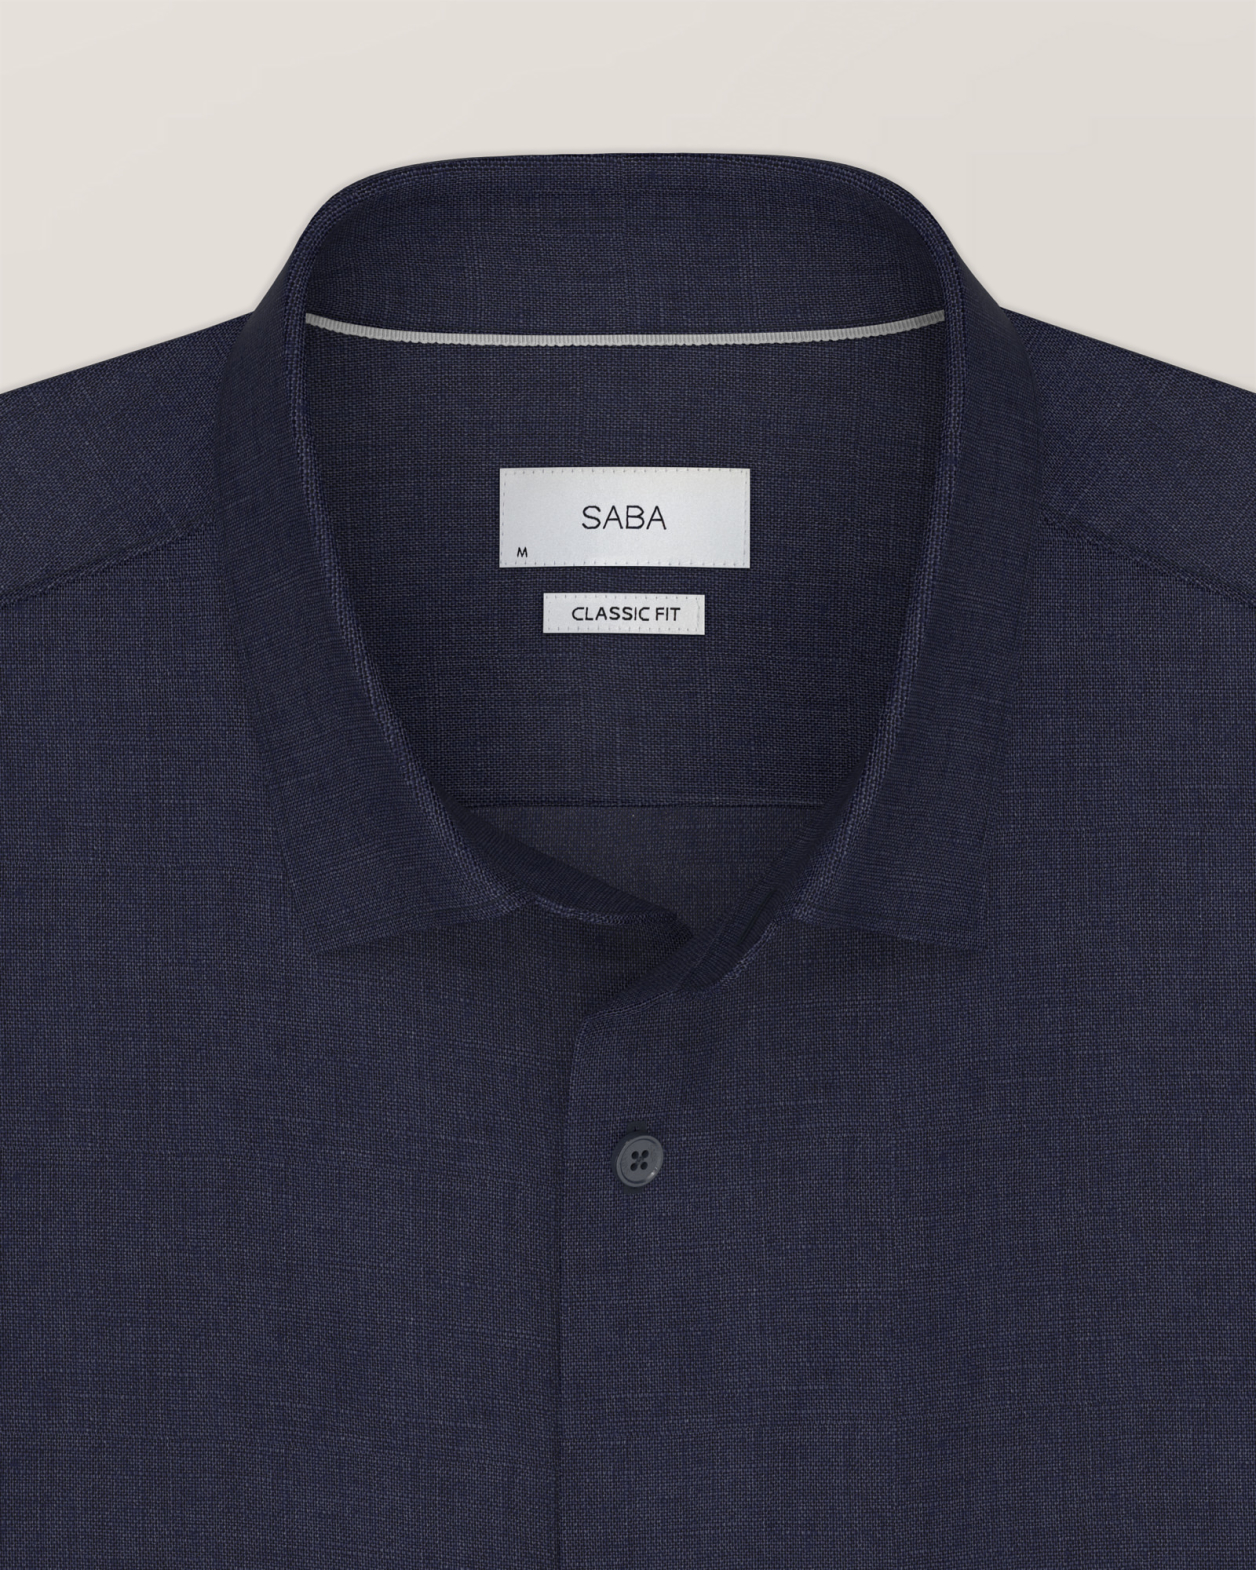 Anderson Long Sleeve Classic Linen Shirt in NAVY